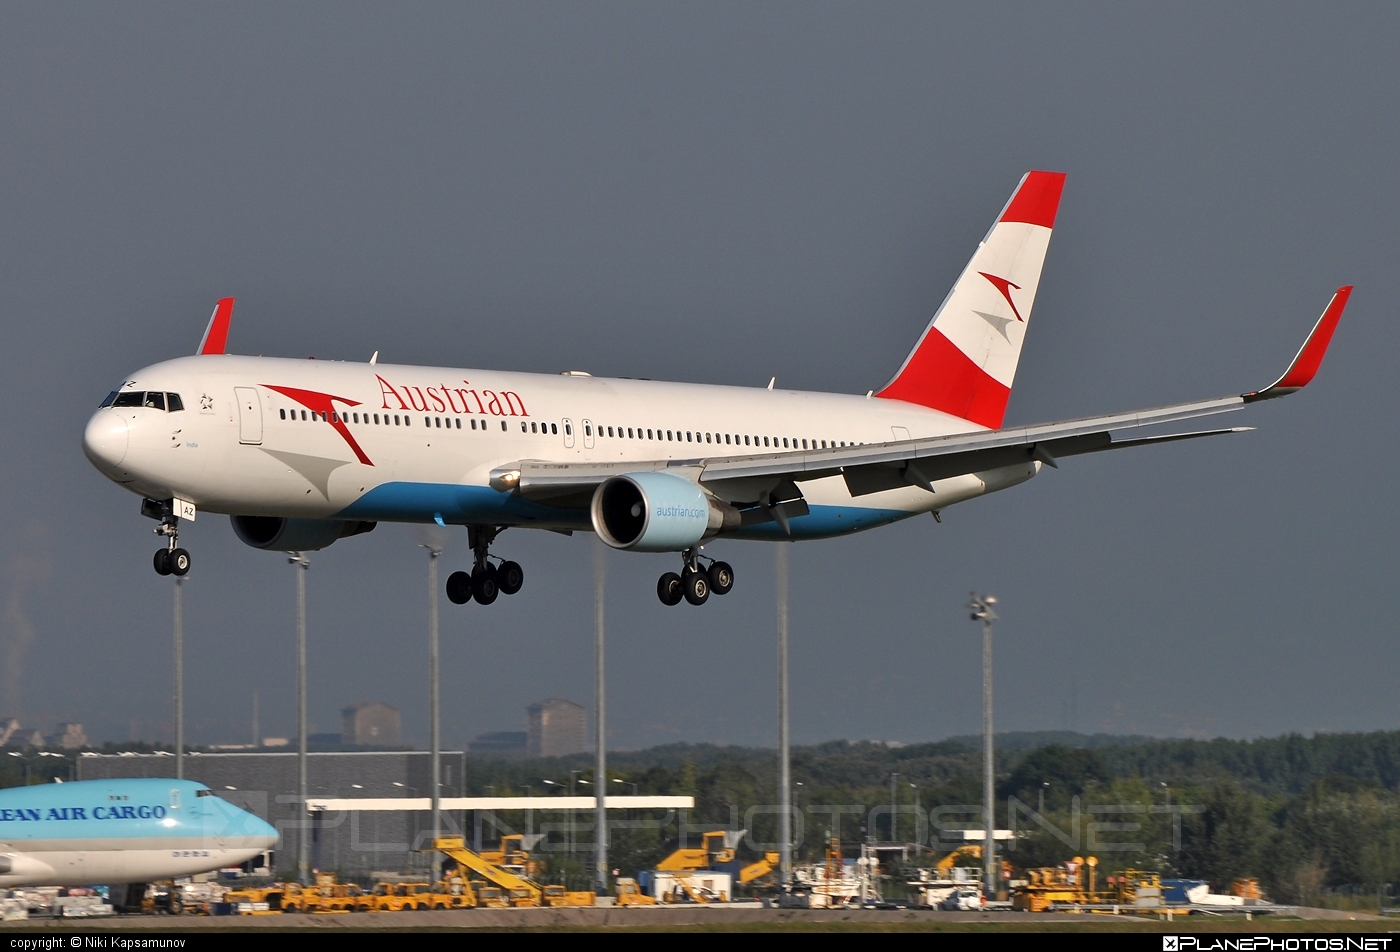 Boeing 767-300ER - OE-LAZ operated by Austrian Airlines #austrian #austrianAirlines #b767 #b767er #boeing #boeing767